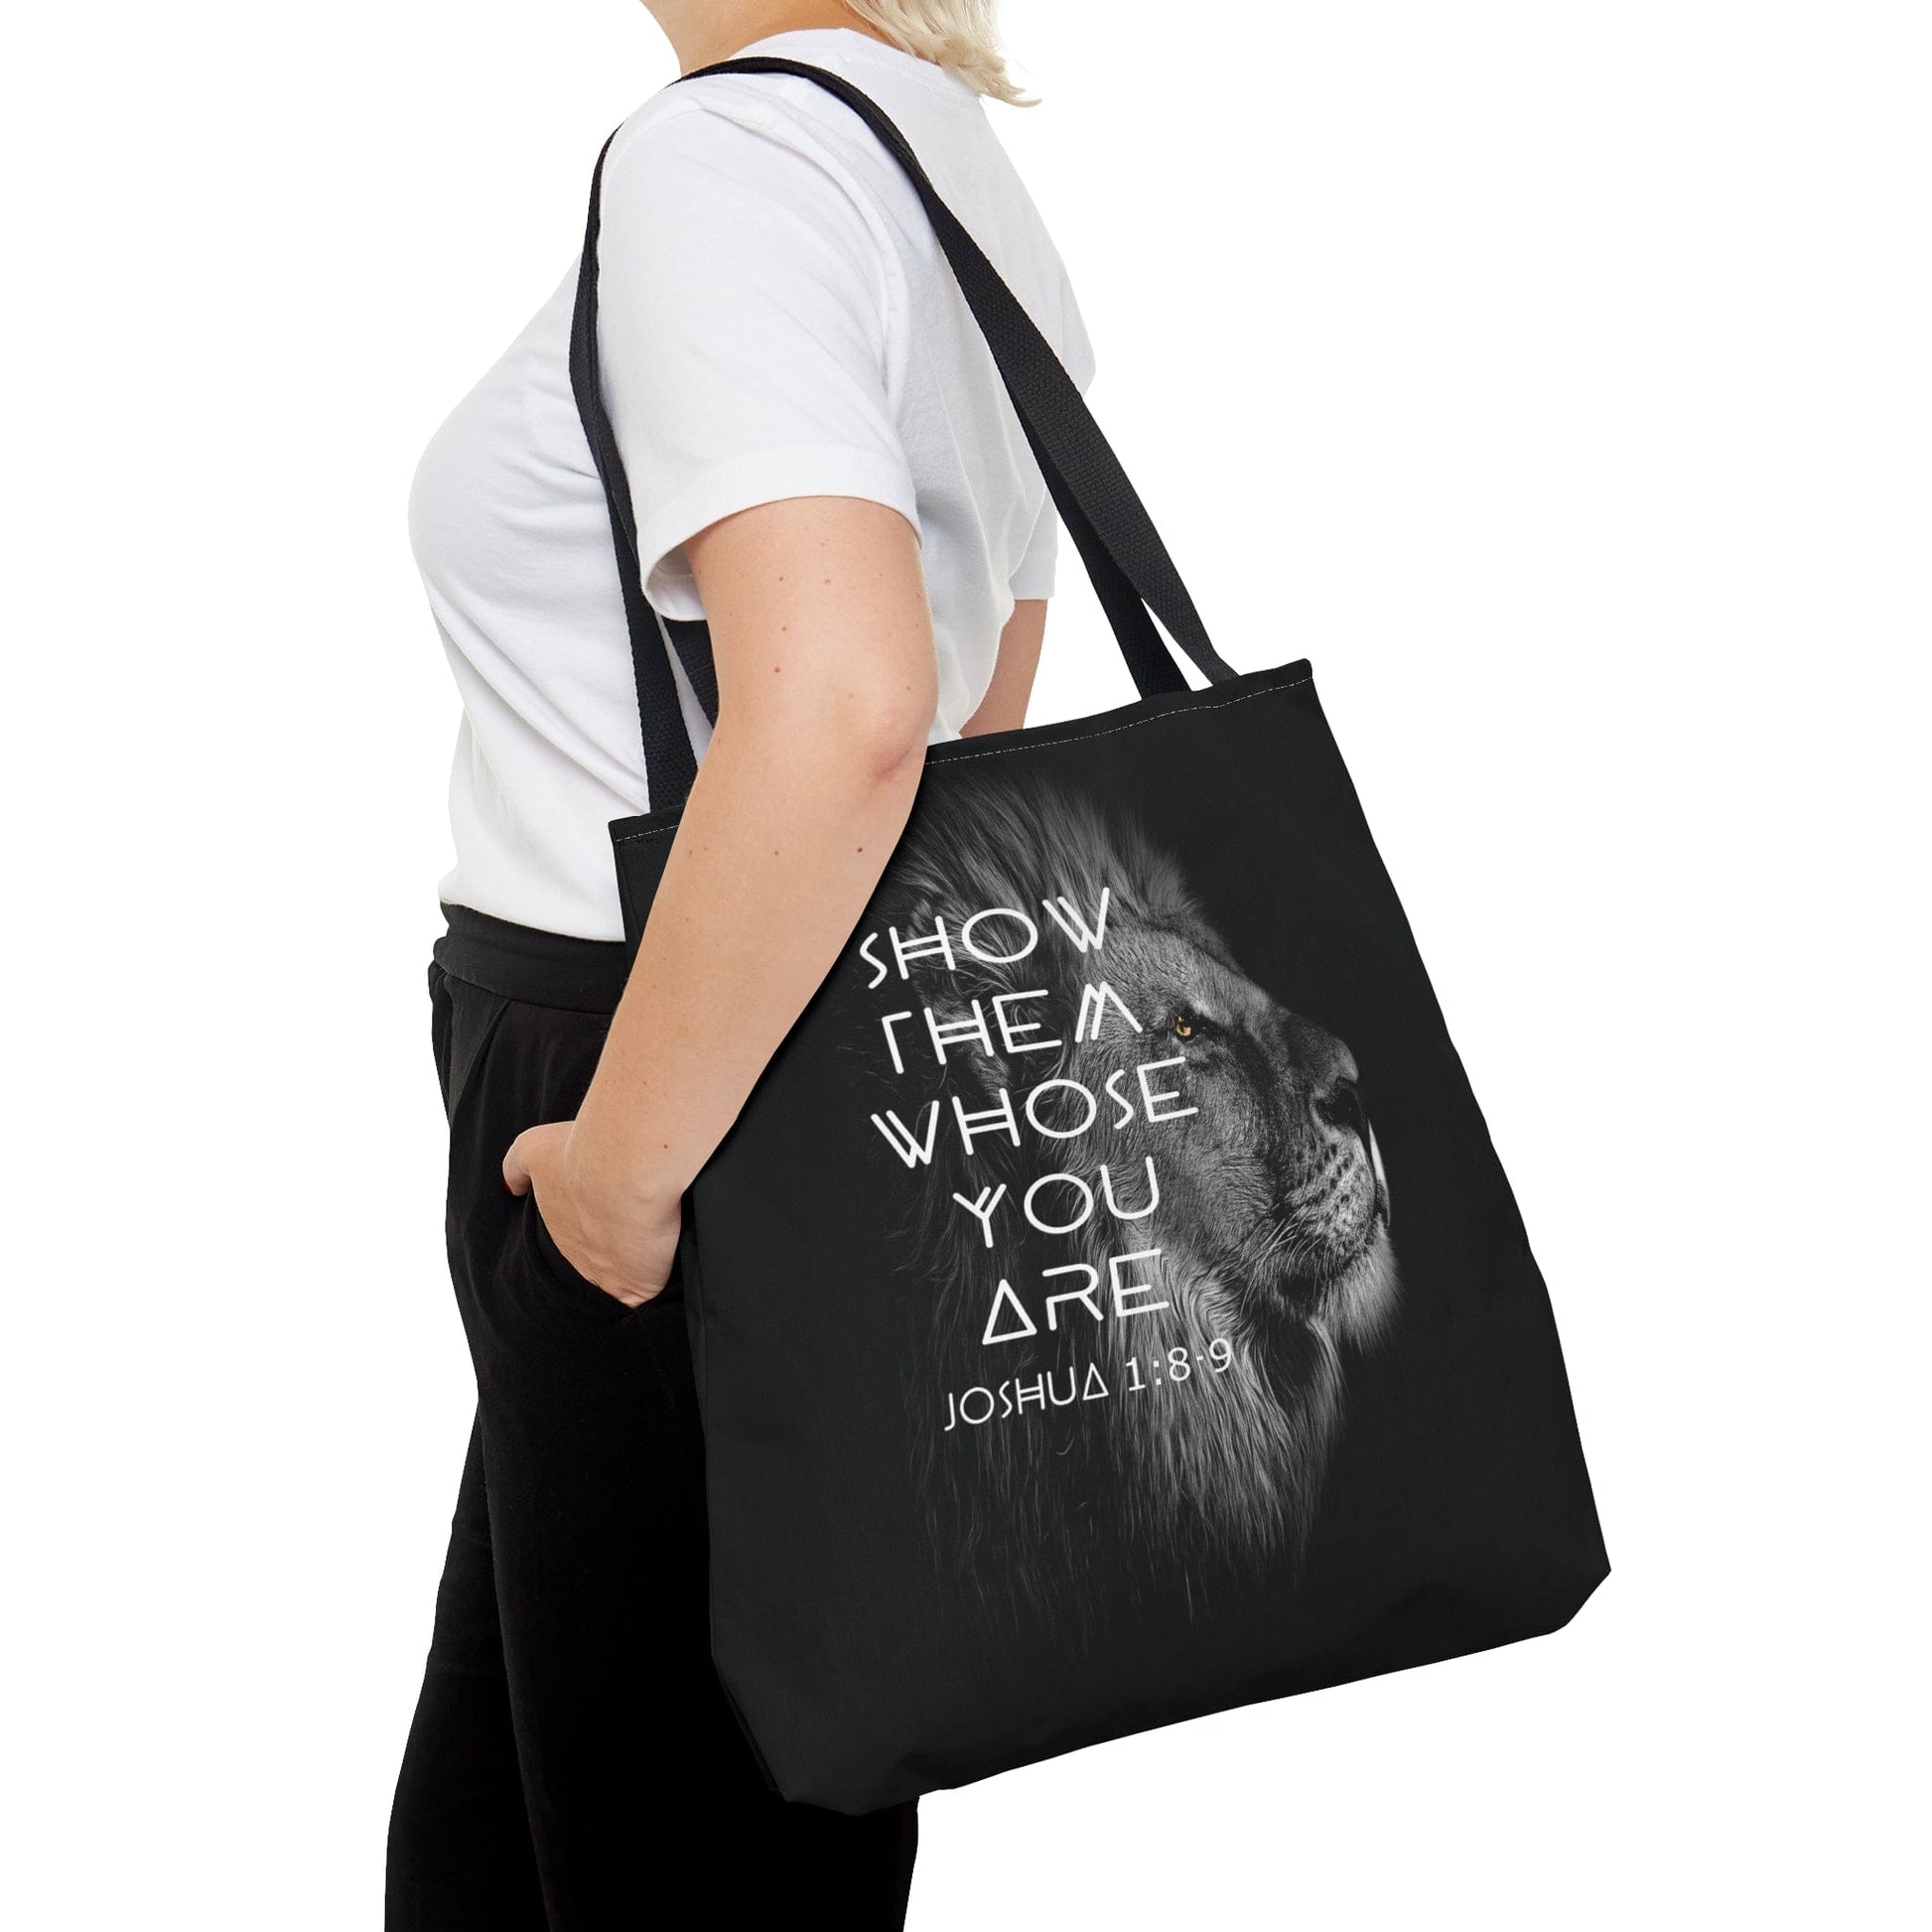 Printify Bags Show Them Whose You Are Christian Tote Bag